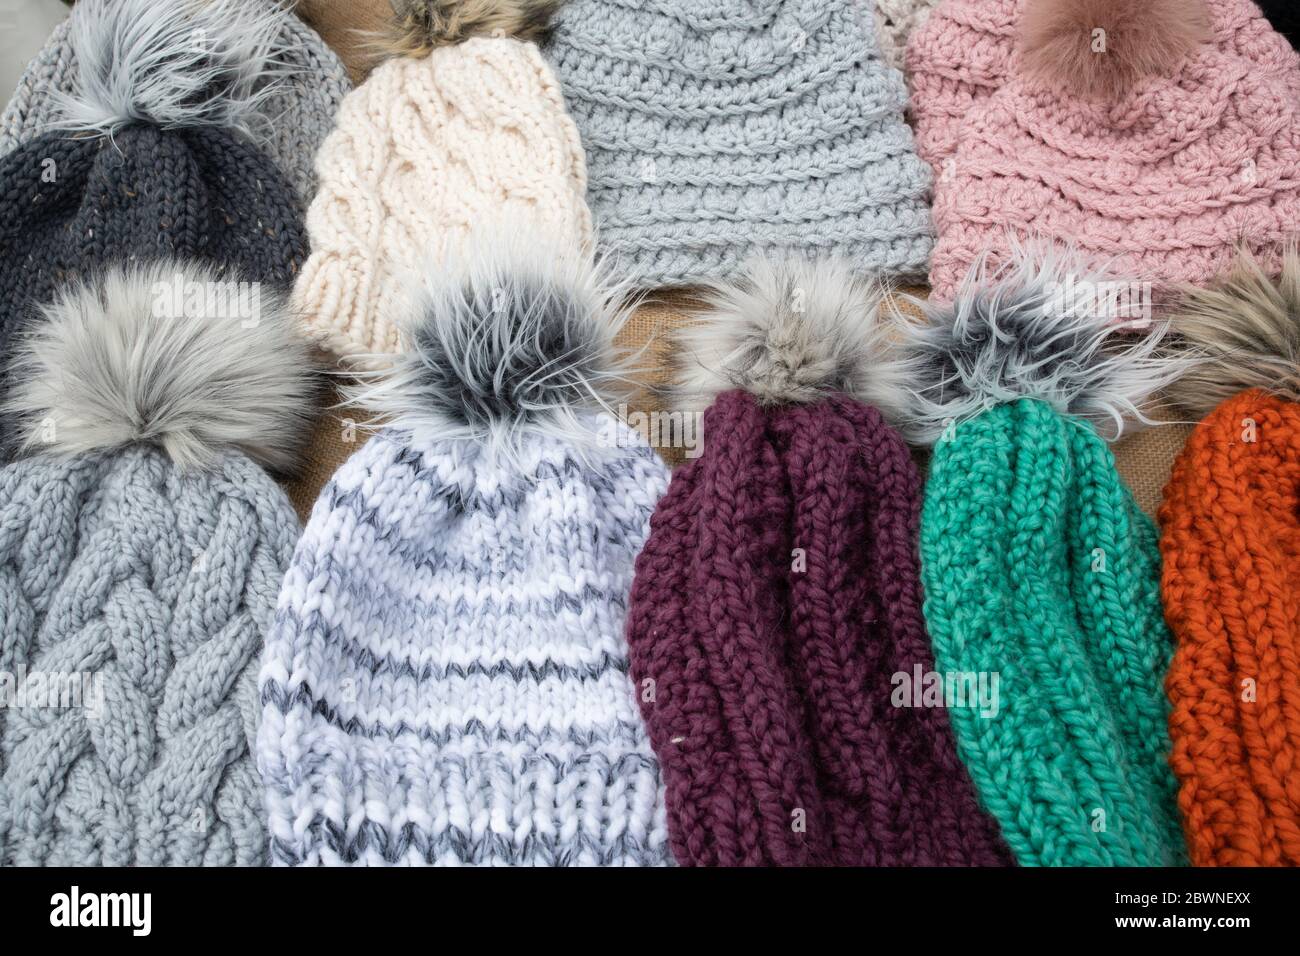 selection of hand crafted hats by knit or crochet with fake fur pom poms on a table for sale at a craft fair Stock Photo